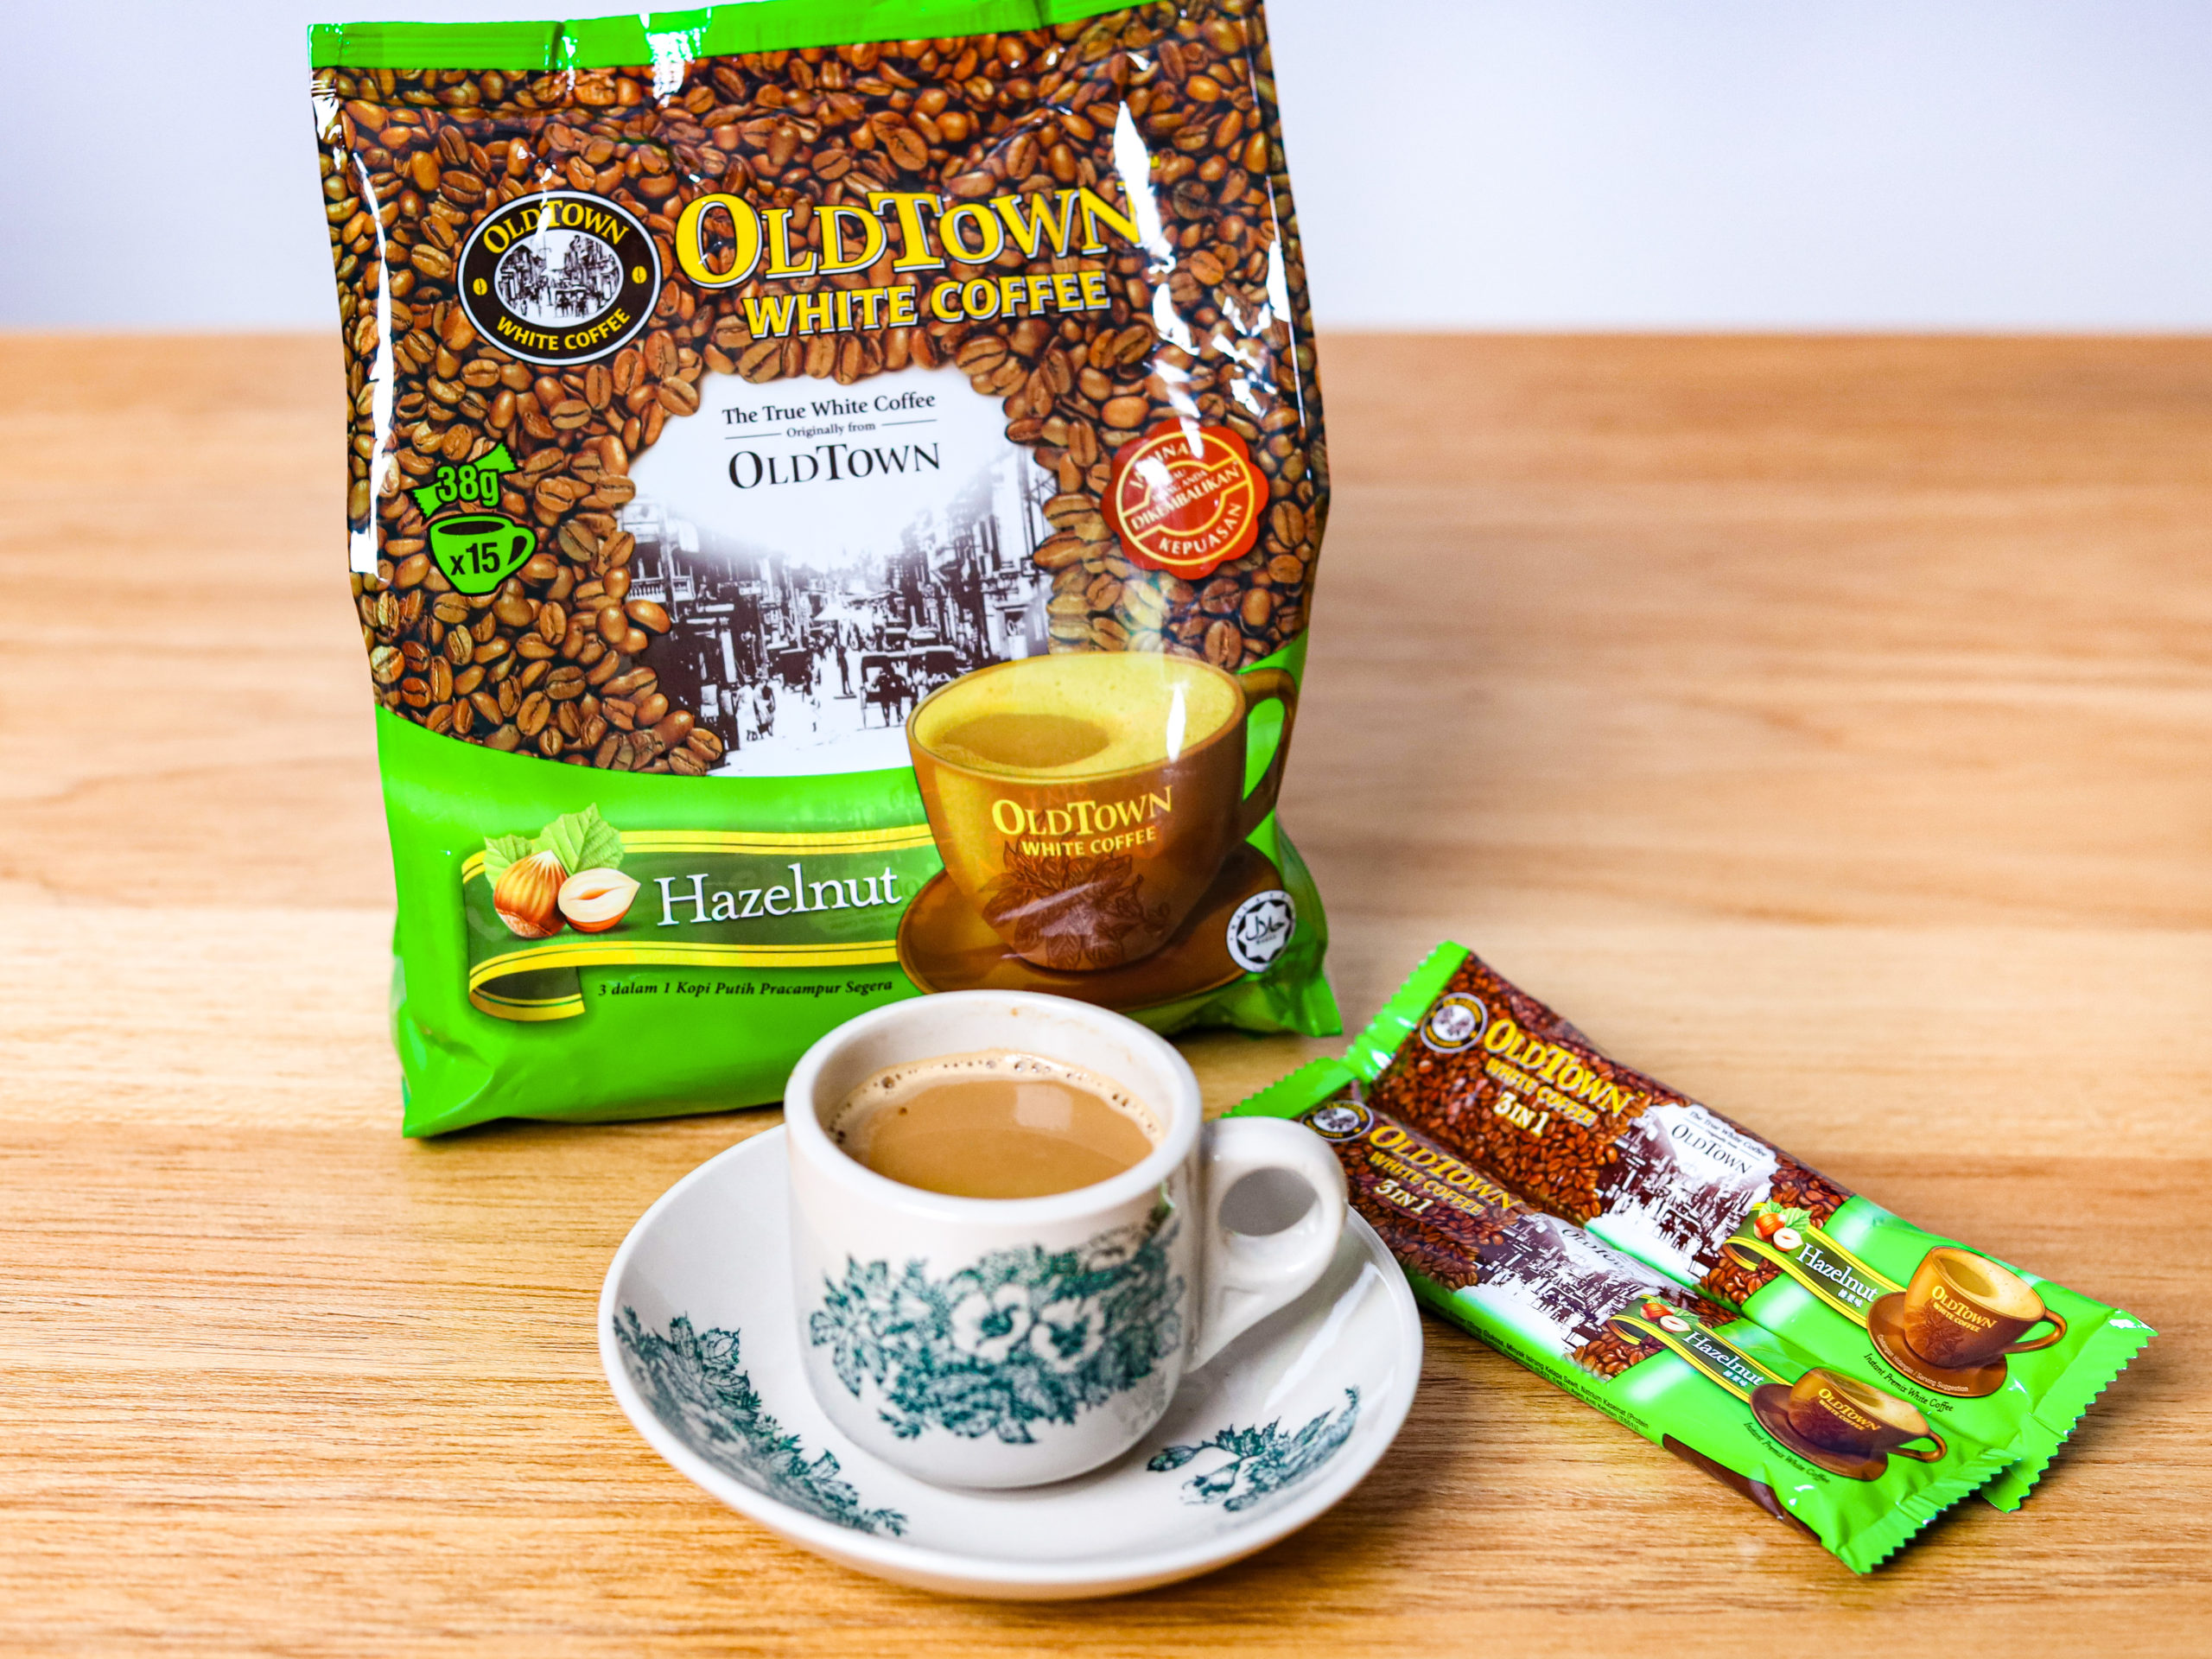 white coffee are malaysian products and a great souvenir